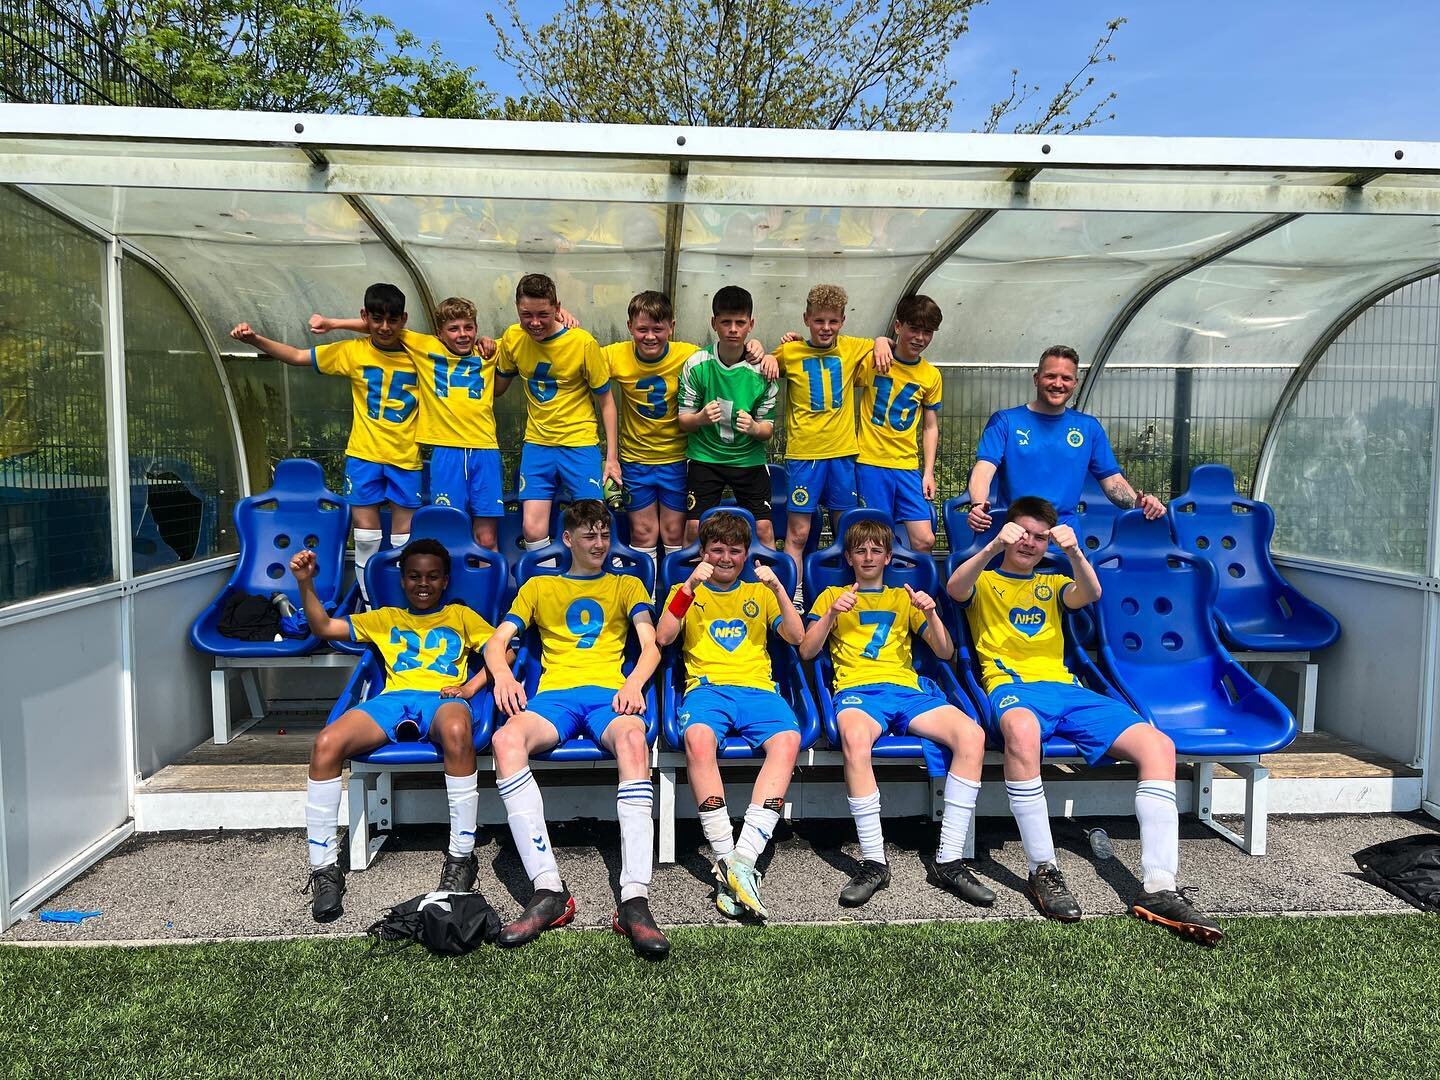 On Sunday it was a very competitive and hard fought match between two passionate sides seeing Ramsgate Yellow take an initial 1:0 lead against Risers U13 Blues. 

An incredible return shot from easily 60m and within our own half made it 1:1. A phenom